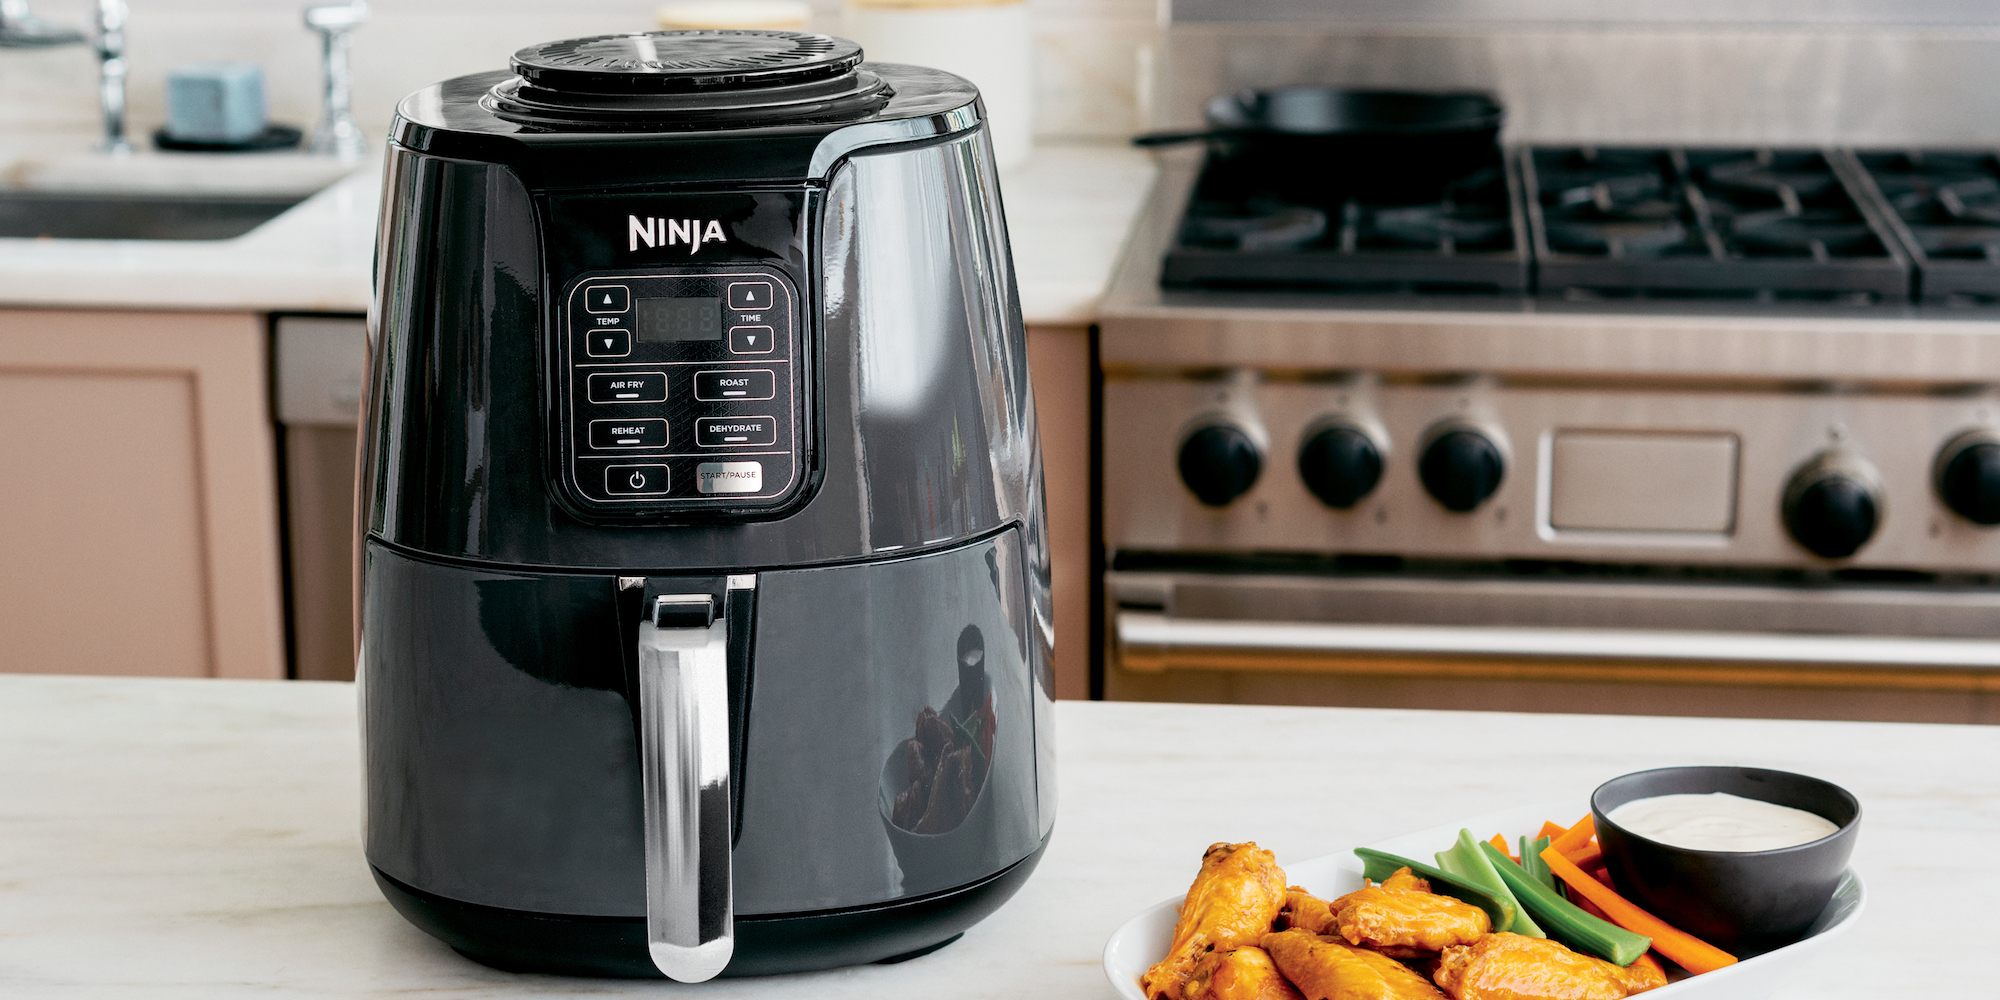 Walmart secret clearance deal: This Chefman Air Fryer and Oven